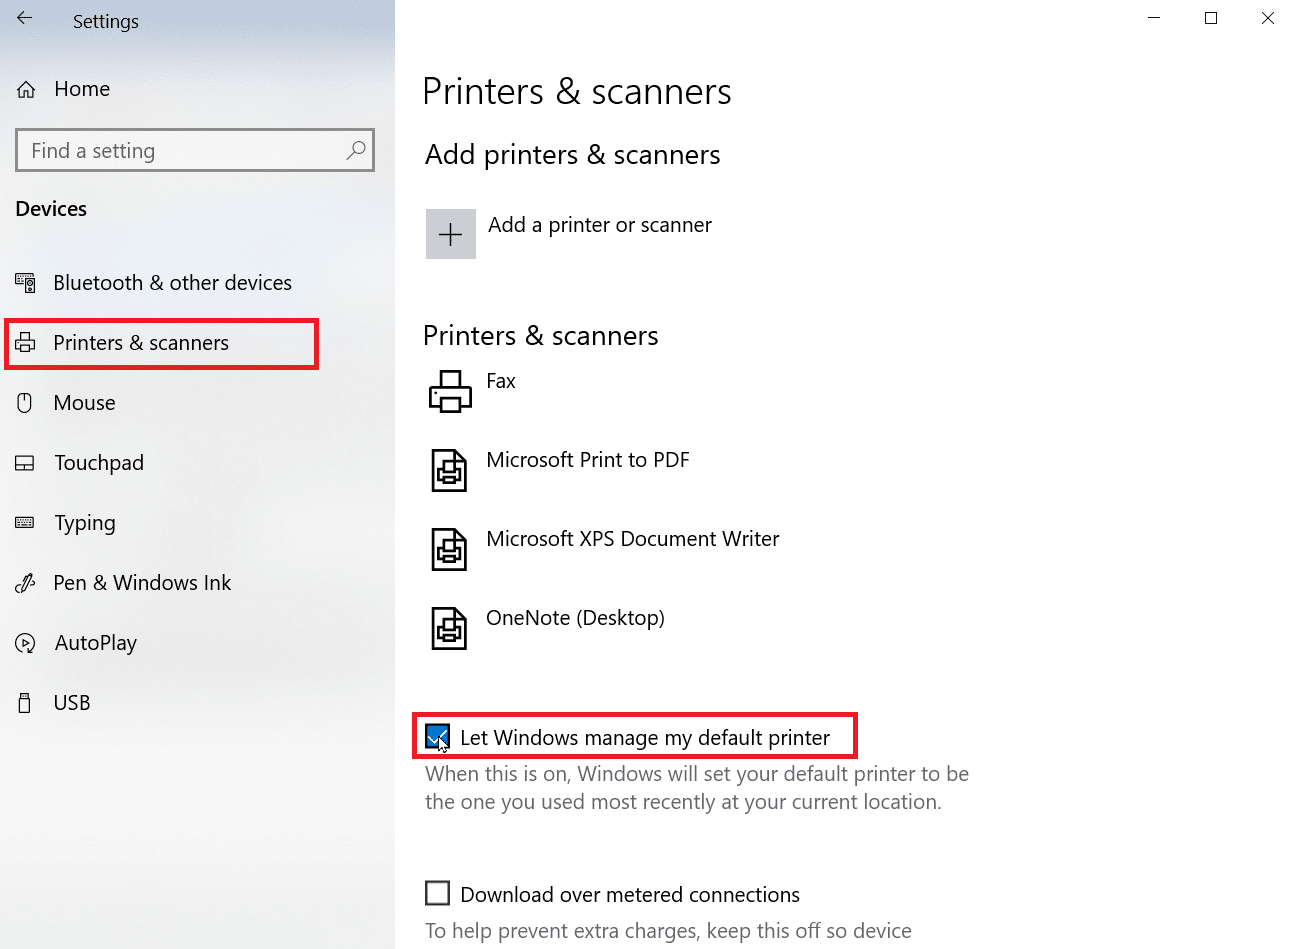 go to printers and scanners and uncheck let windows manage my default printer